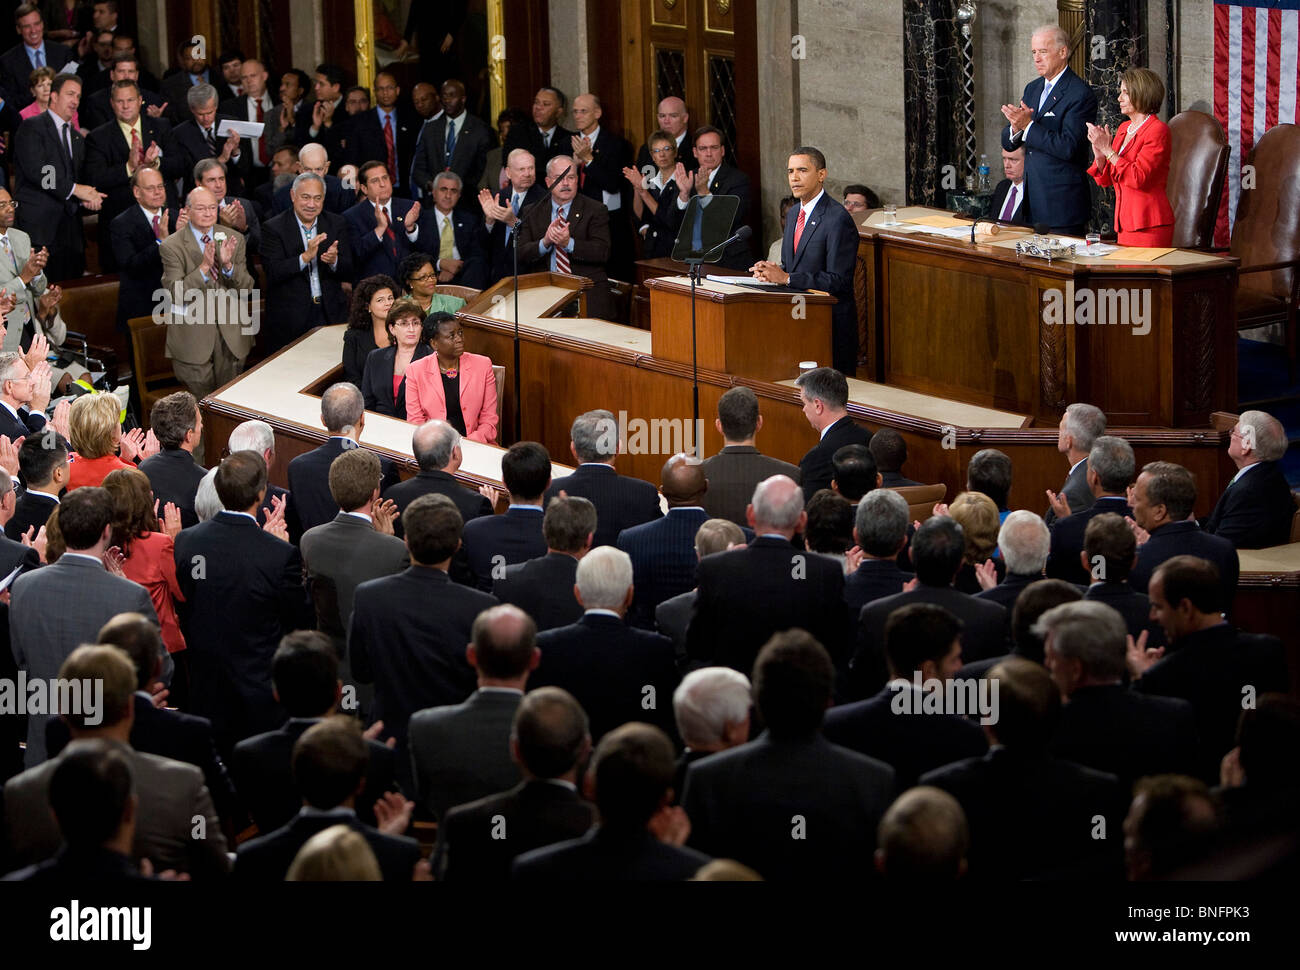 President Barack Obama addresses a joint session of Congress on Healthcare reform.  Stock Photo